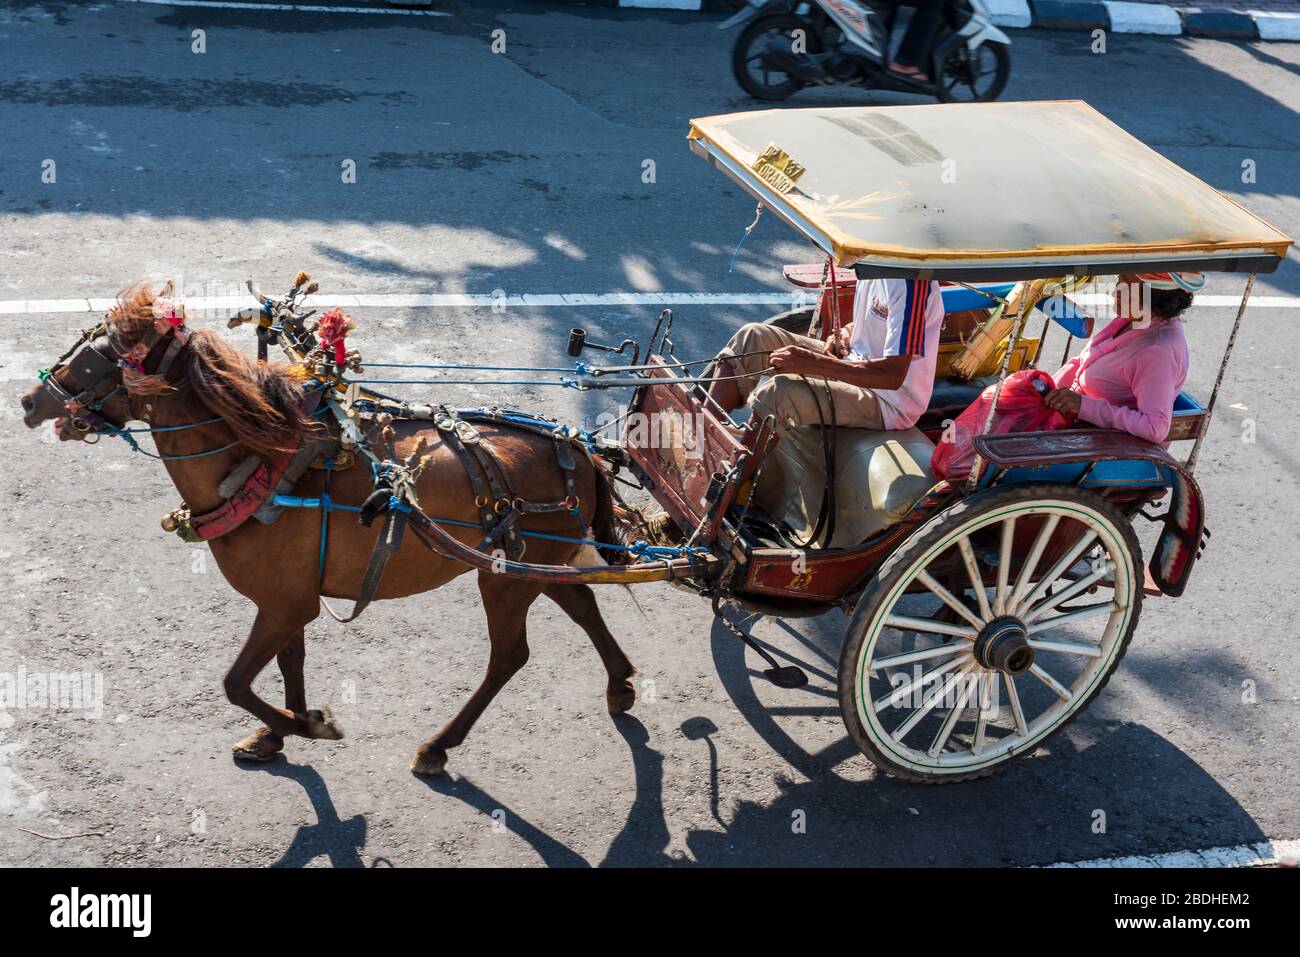 Port Benoa, Bali Indonesia -- Feb 28, 2016. A horse drawn carriage and  driver transports a woman passenger wearing a pink outfit and a hat in Bali,  In Stock Photo - Alamy